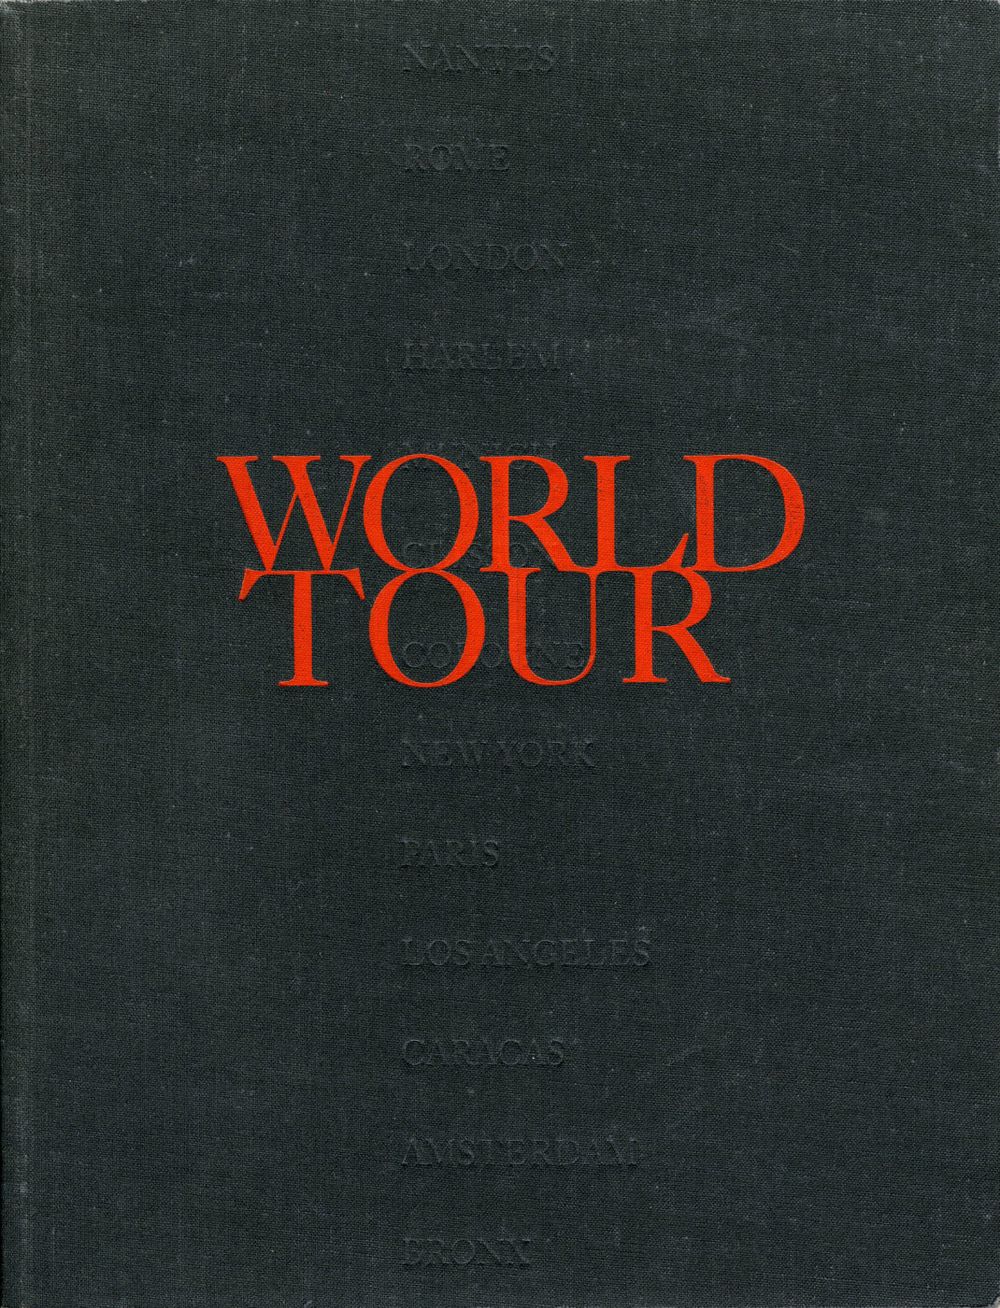 Book cover on plain gray background with title of World Tour